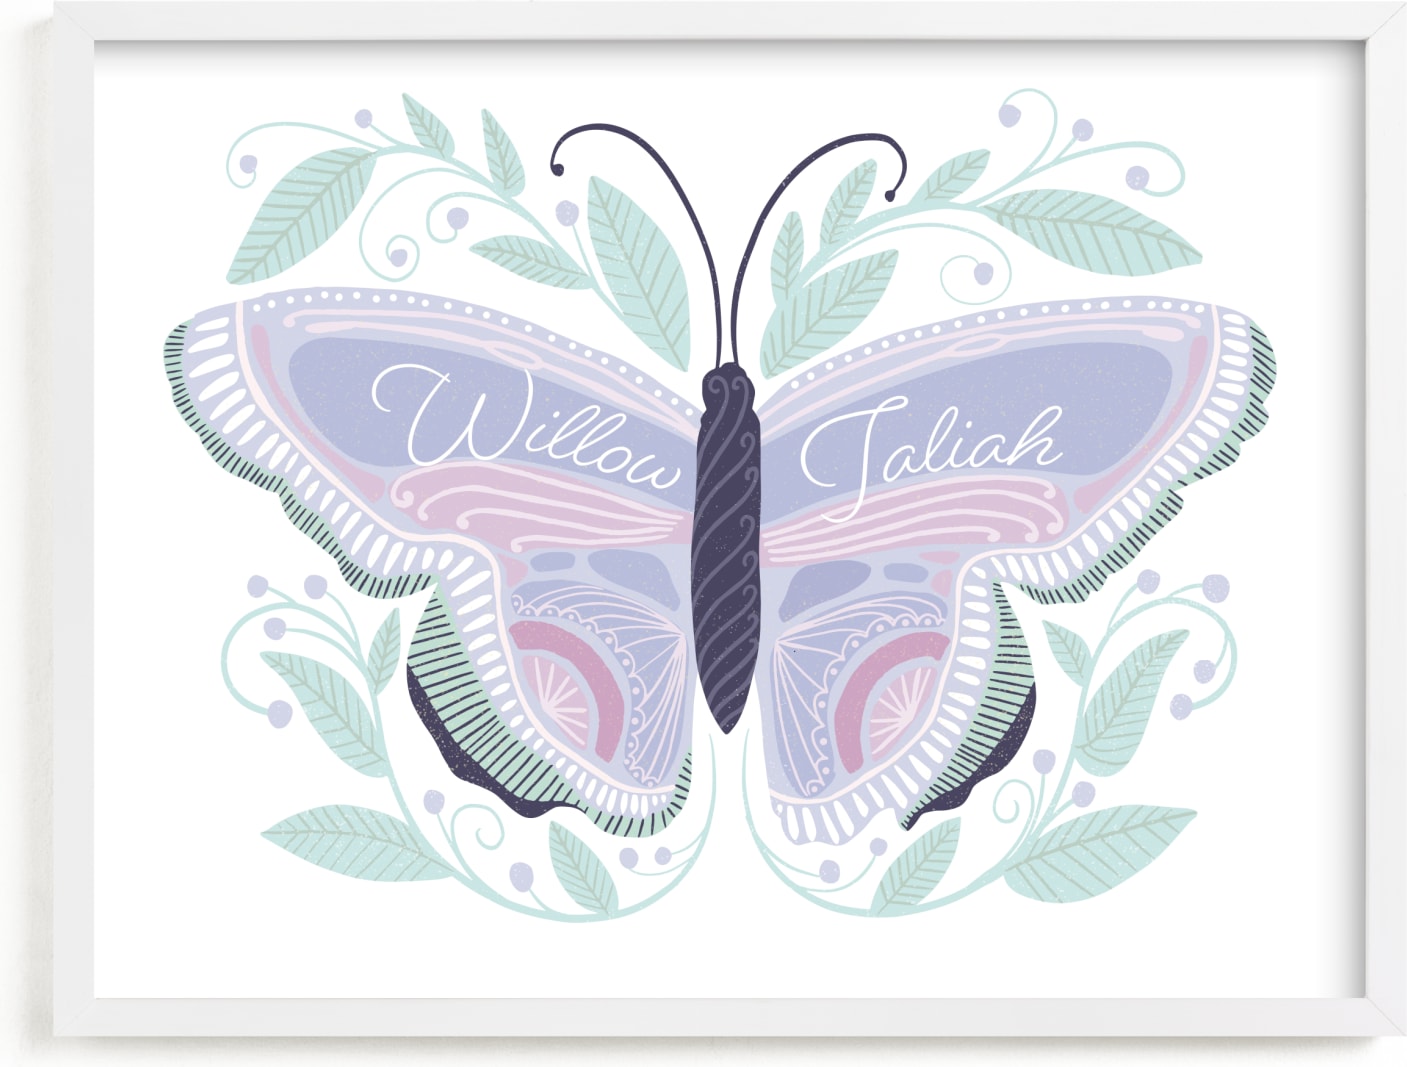 This is a purple personalized art for kid by Blue Ombre co called Flutter & Fly.